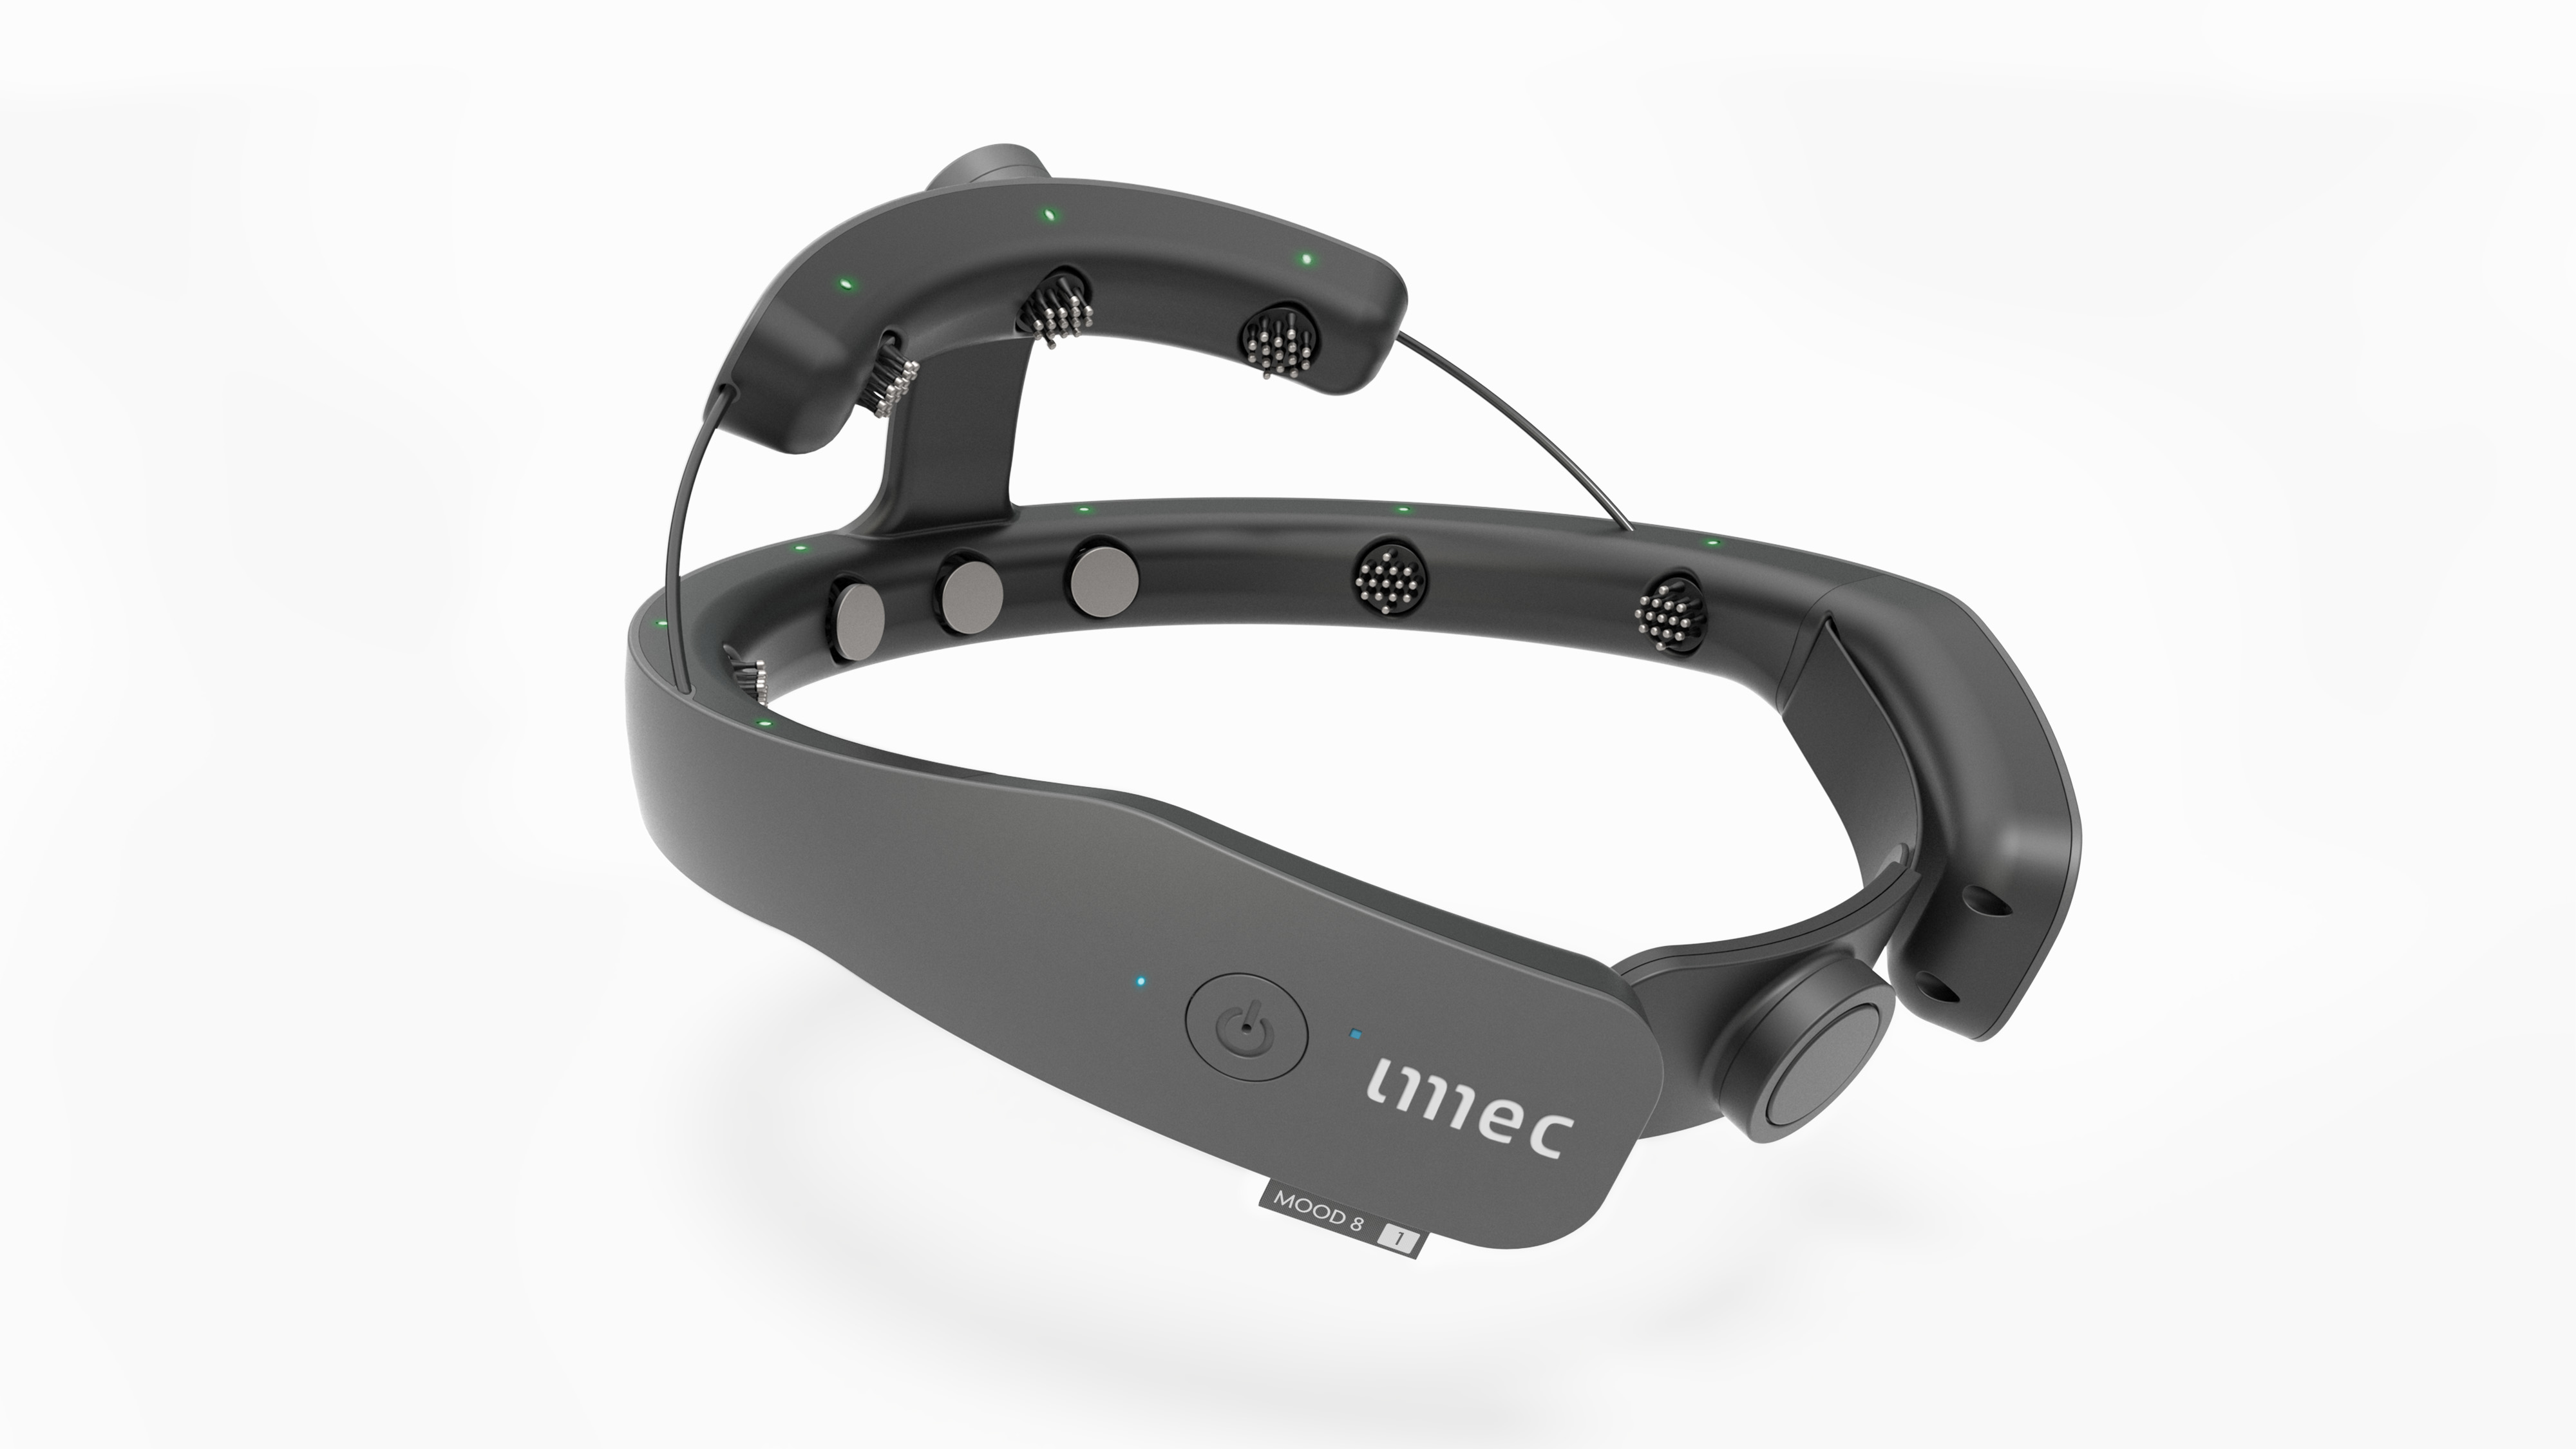 Two of imec’s EEG headsets: the one from the press release in 2018 and the one developed for Amorepacific to be used as an investigational device for fragrance studies.